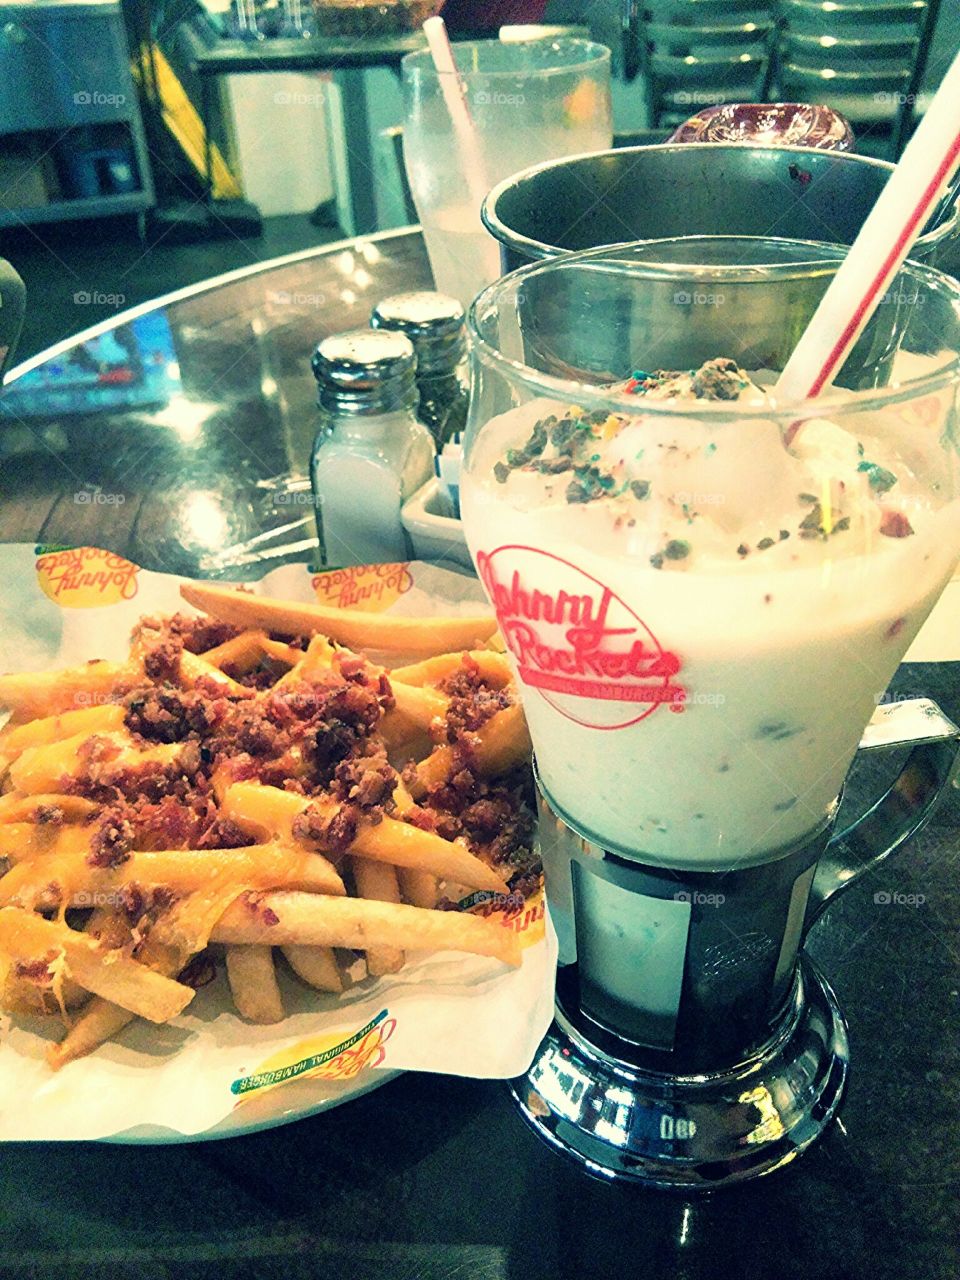 We eat burgers, we eat fries!. The all American Diner that's fun for the whole family! 